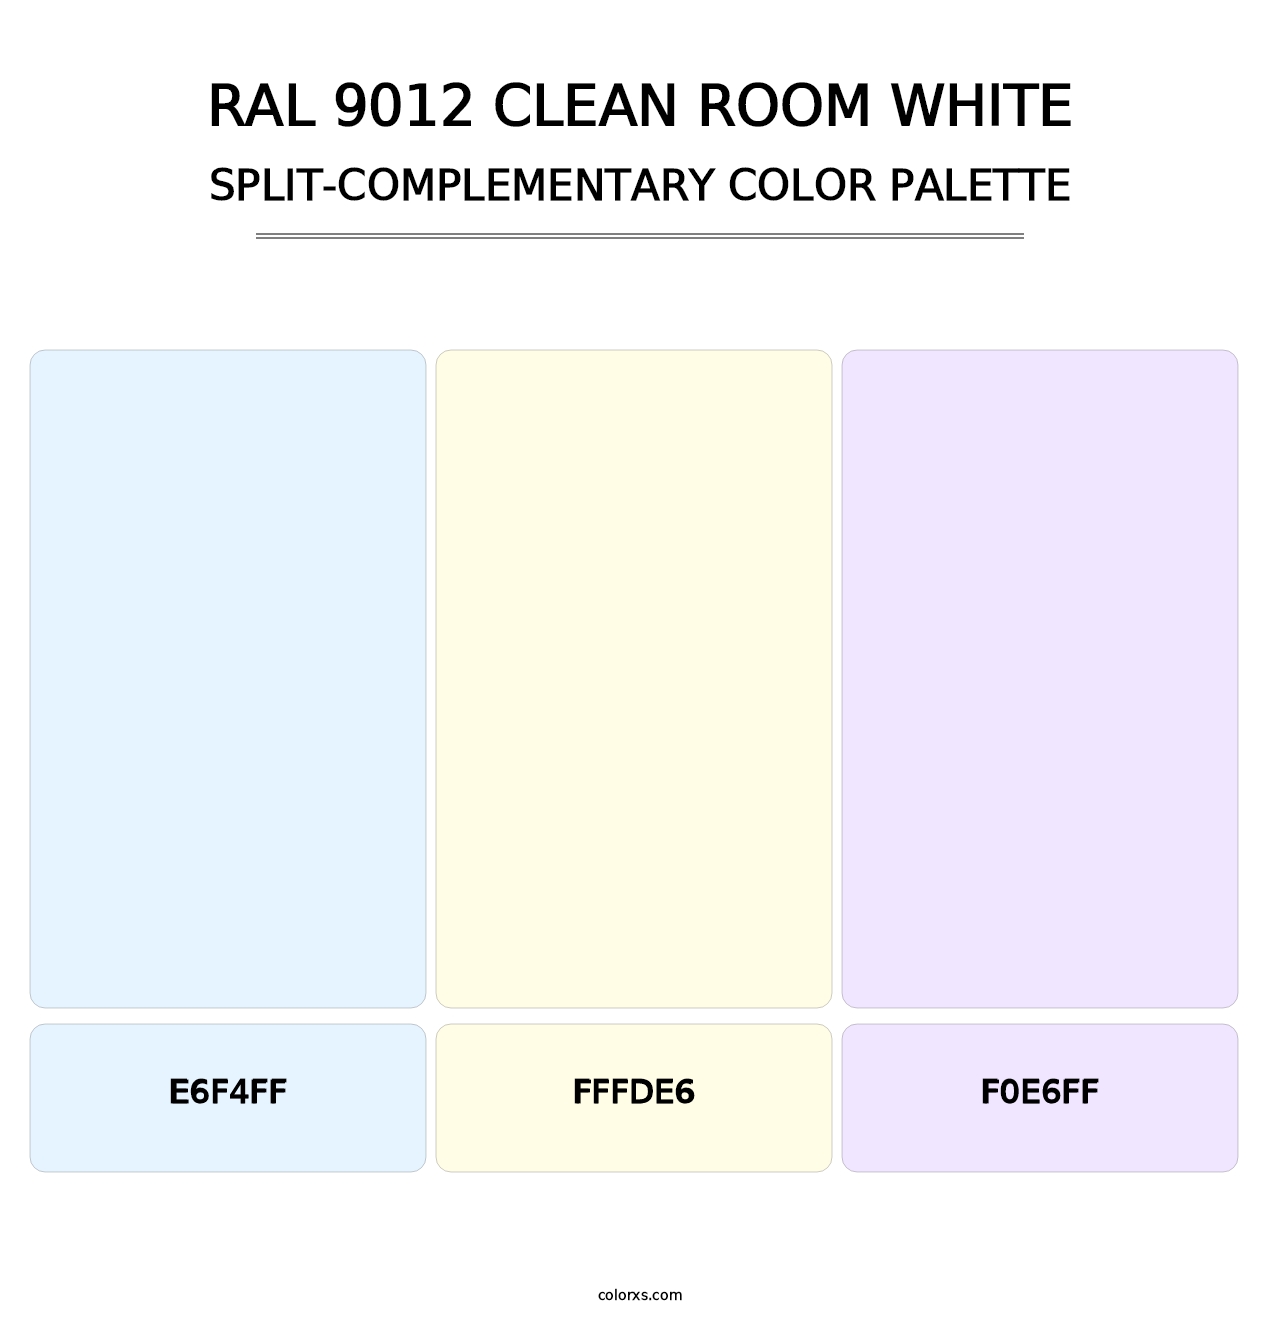 RAL 9012 Clean Room White - Split-Complementary Color Palette